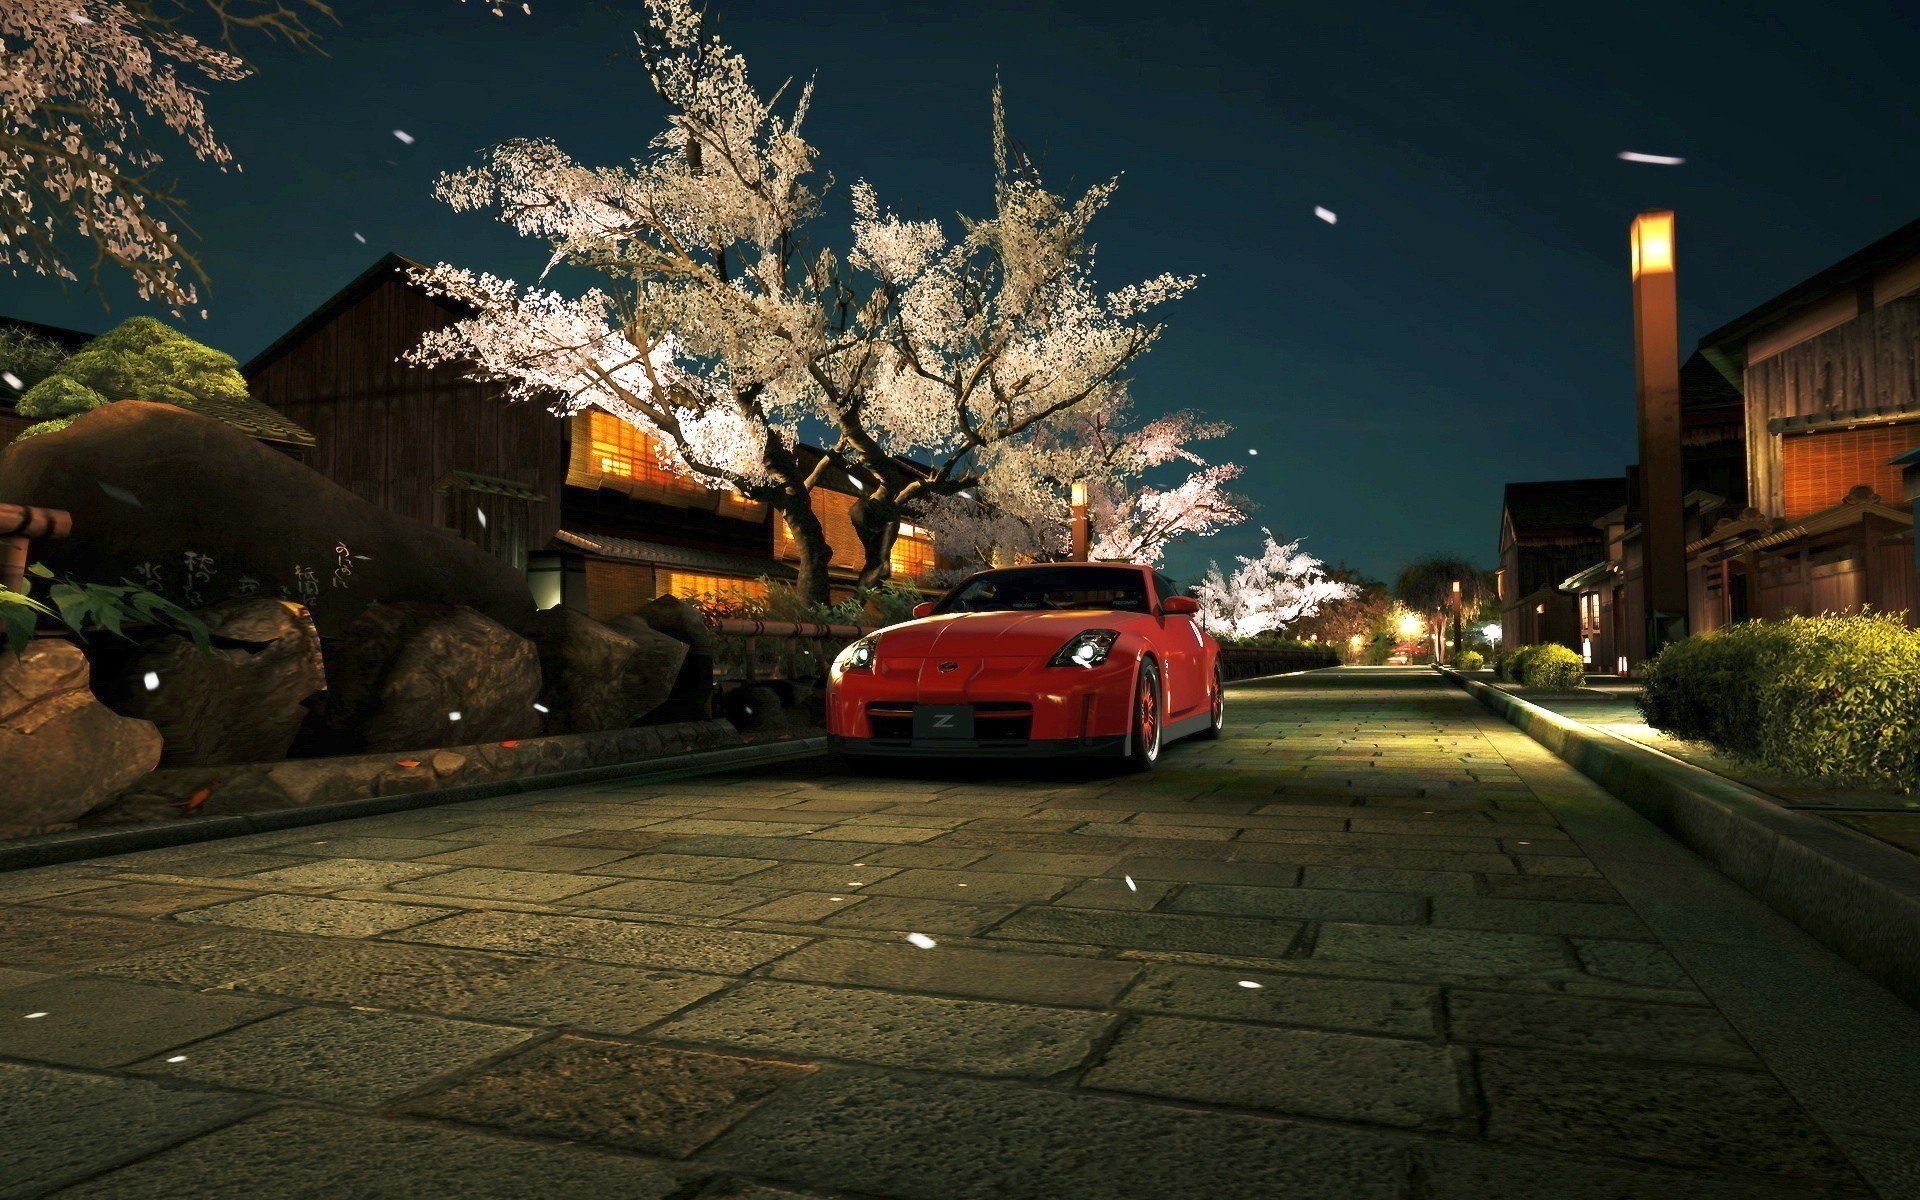 night, Street light, Trees, Cherry blossom, Car, Spring, Cityscape, Japan, Gran Turismo Wallpaper HD / Desktop and Mobile Background